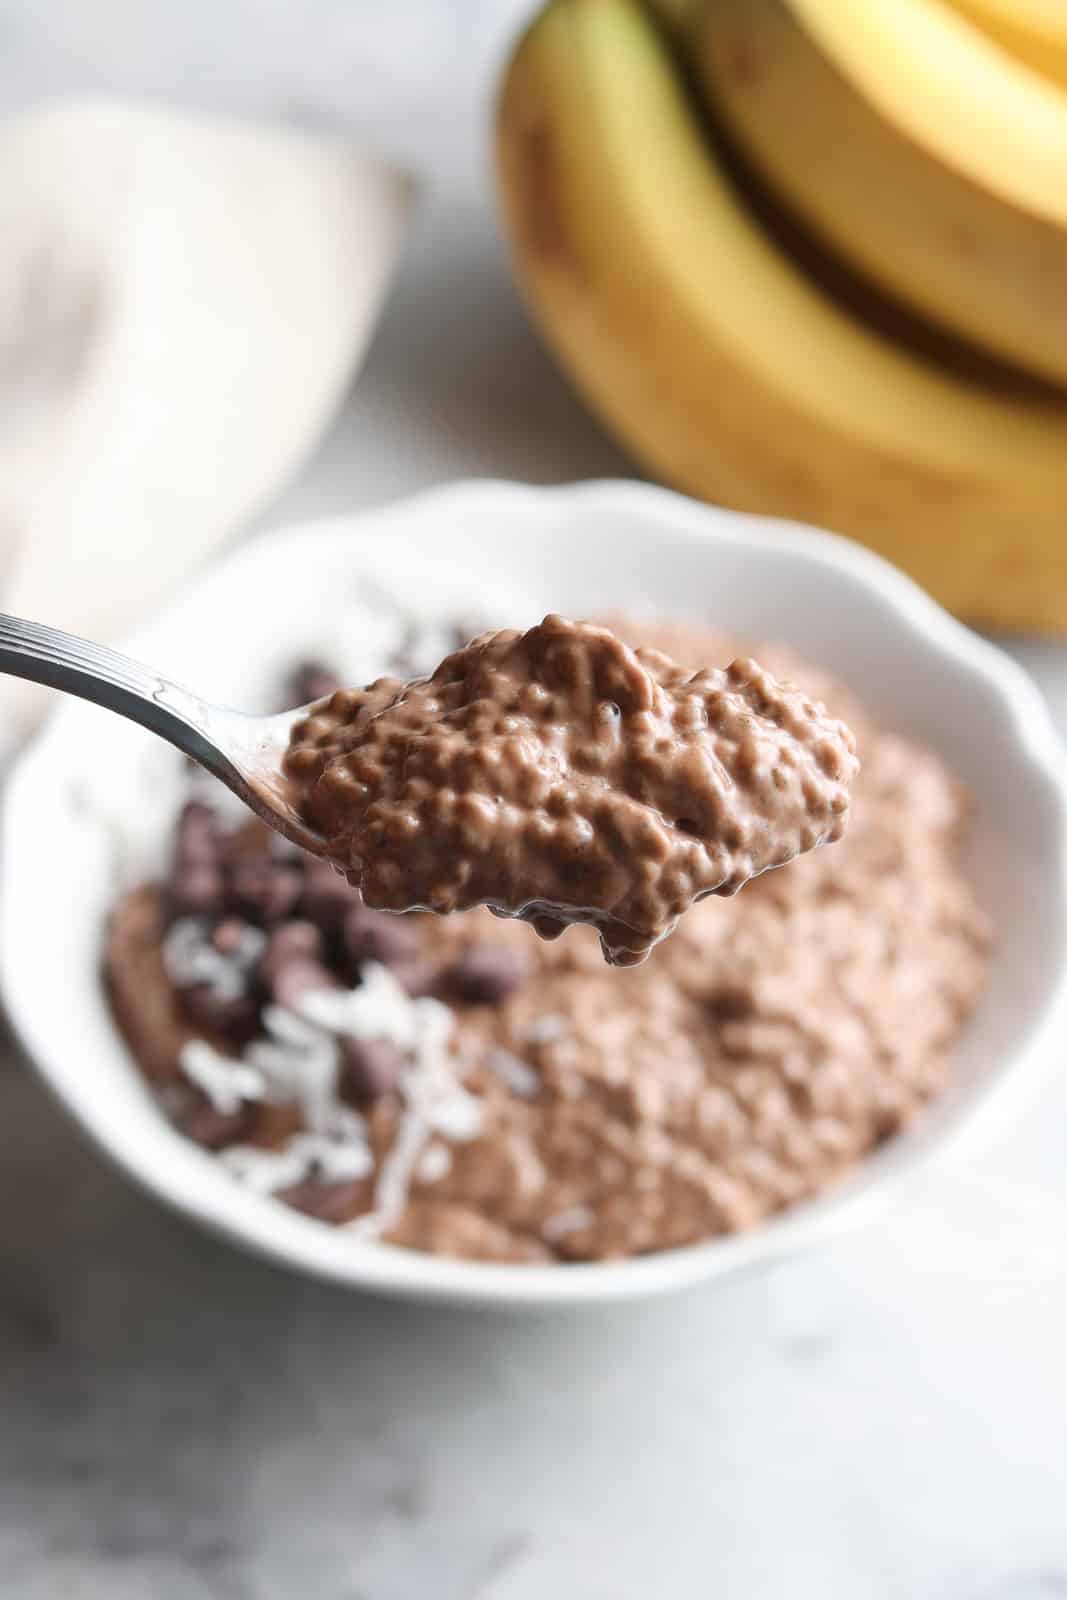 A scoop of chocolate chia seed pudding on a spoon